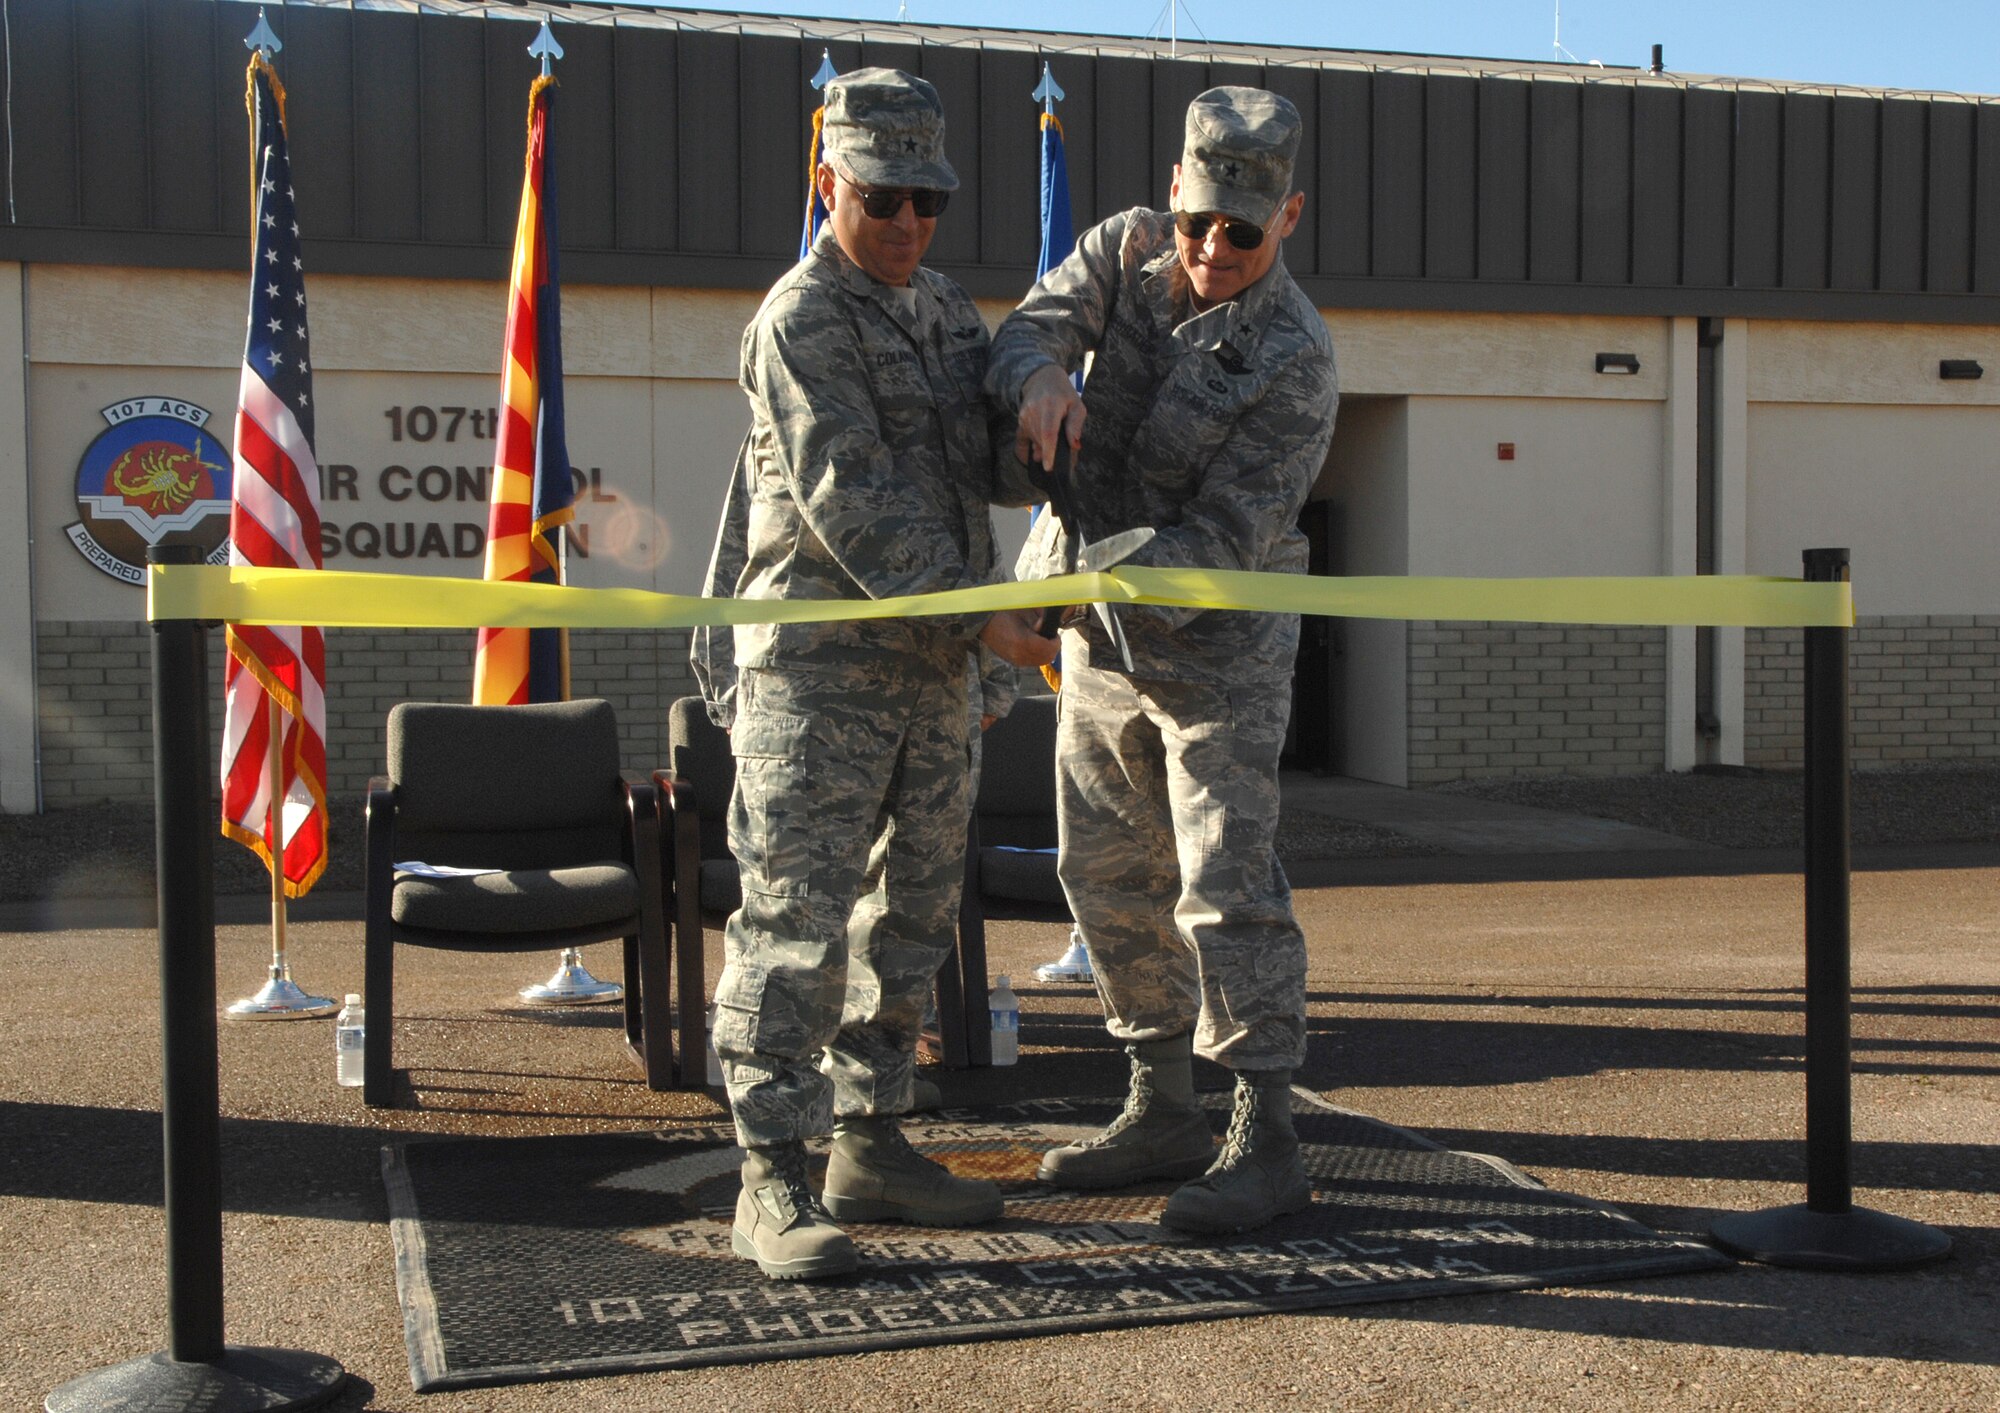 Brig. Gen.  Michael G. Colangelo, Arizona National Guard commander, and Brig. Gen. Kurt Neubauer, 56th FW commander, perform the ribbon cutting for the 107th Air Controller Squadron's new facility at Luke AFB.  (A.F. Photo by Tech. Sgt. Jeffrey A. Wolfe)